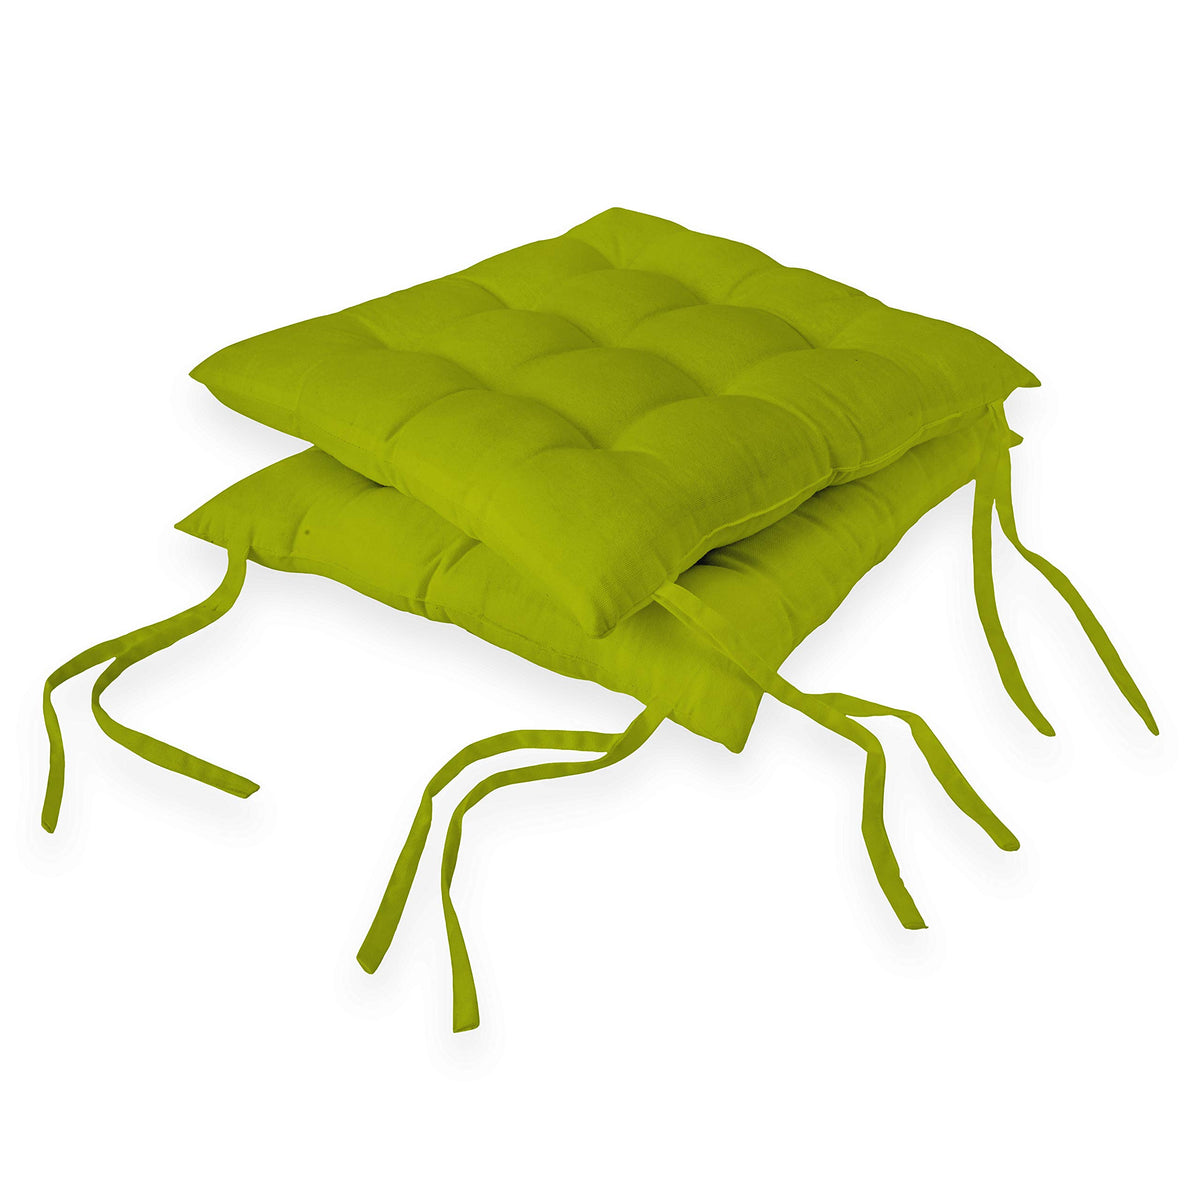 Encasa Homes 2 pcs Chair Cushions 40x40 cm - Lime Green - Dyed Canvas Square Seat Cushions with Micro-Fiber Filling & Ties for Sitting, Pooja, Dining & Office Table